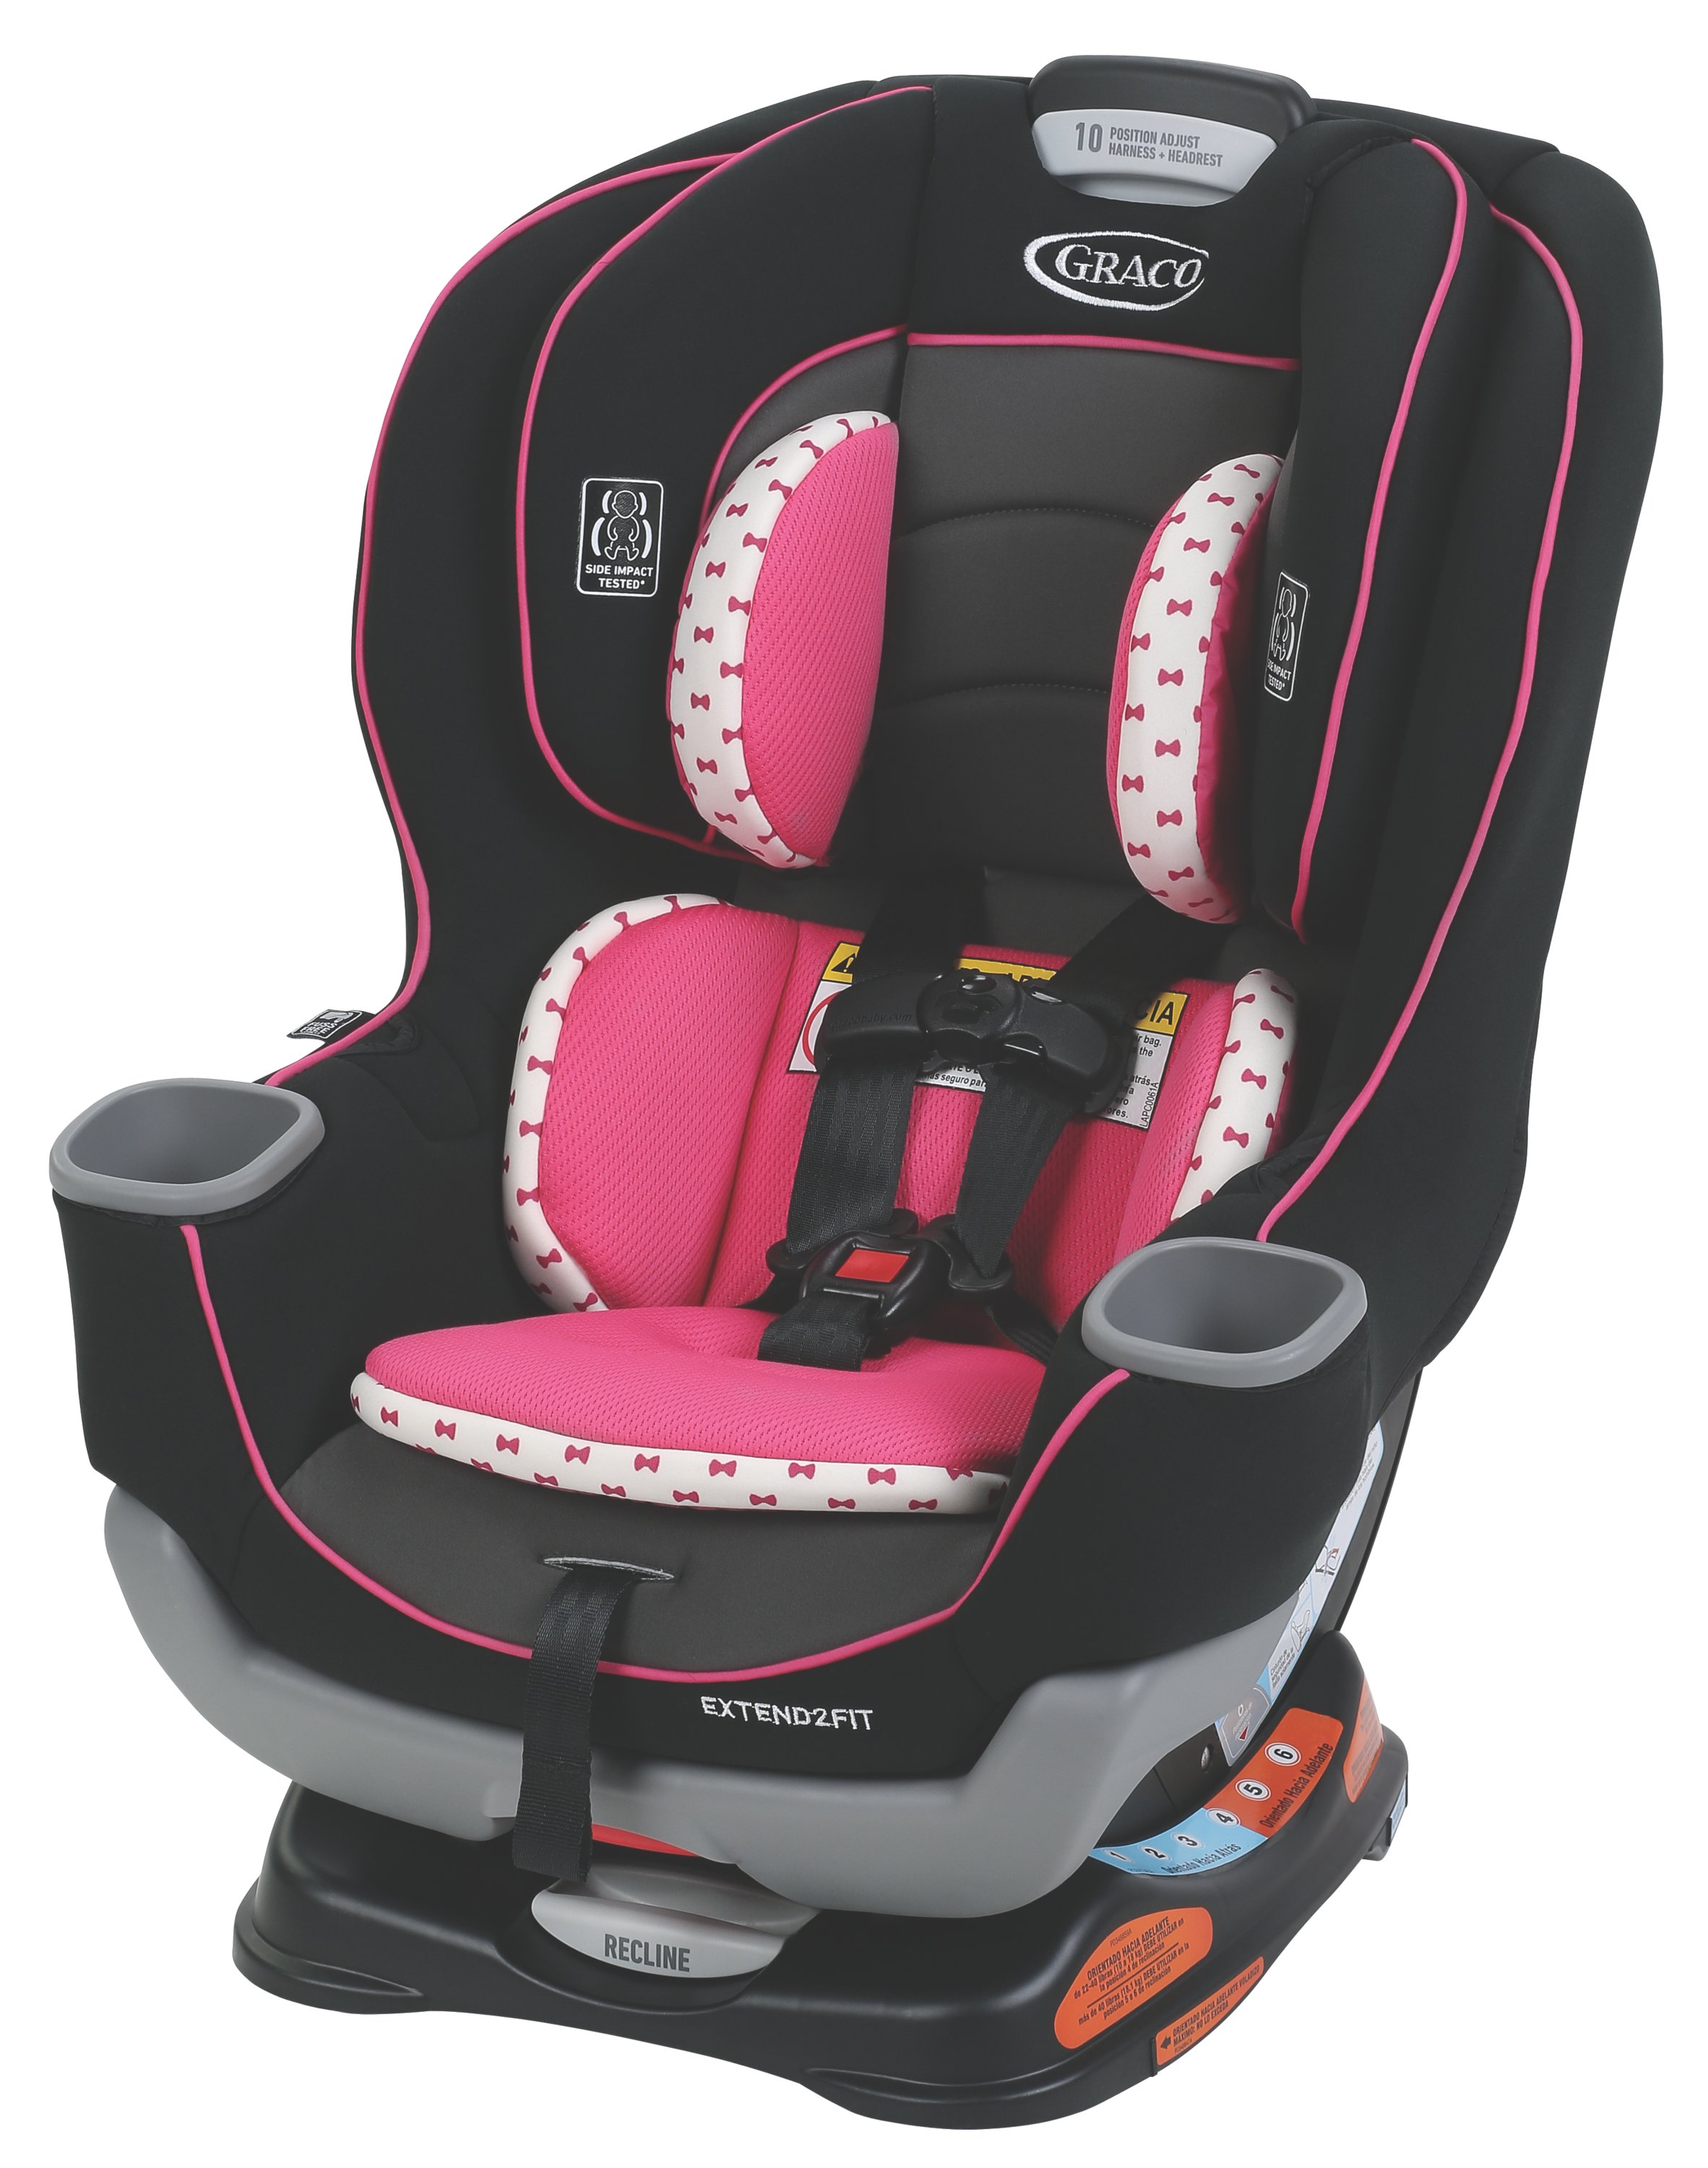 Graco Extend2fit Convertible Car Seat, Graco Extend2fit Convertible Car Seat Stroller Combo